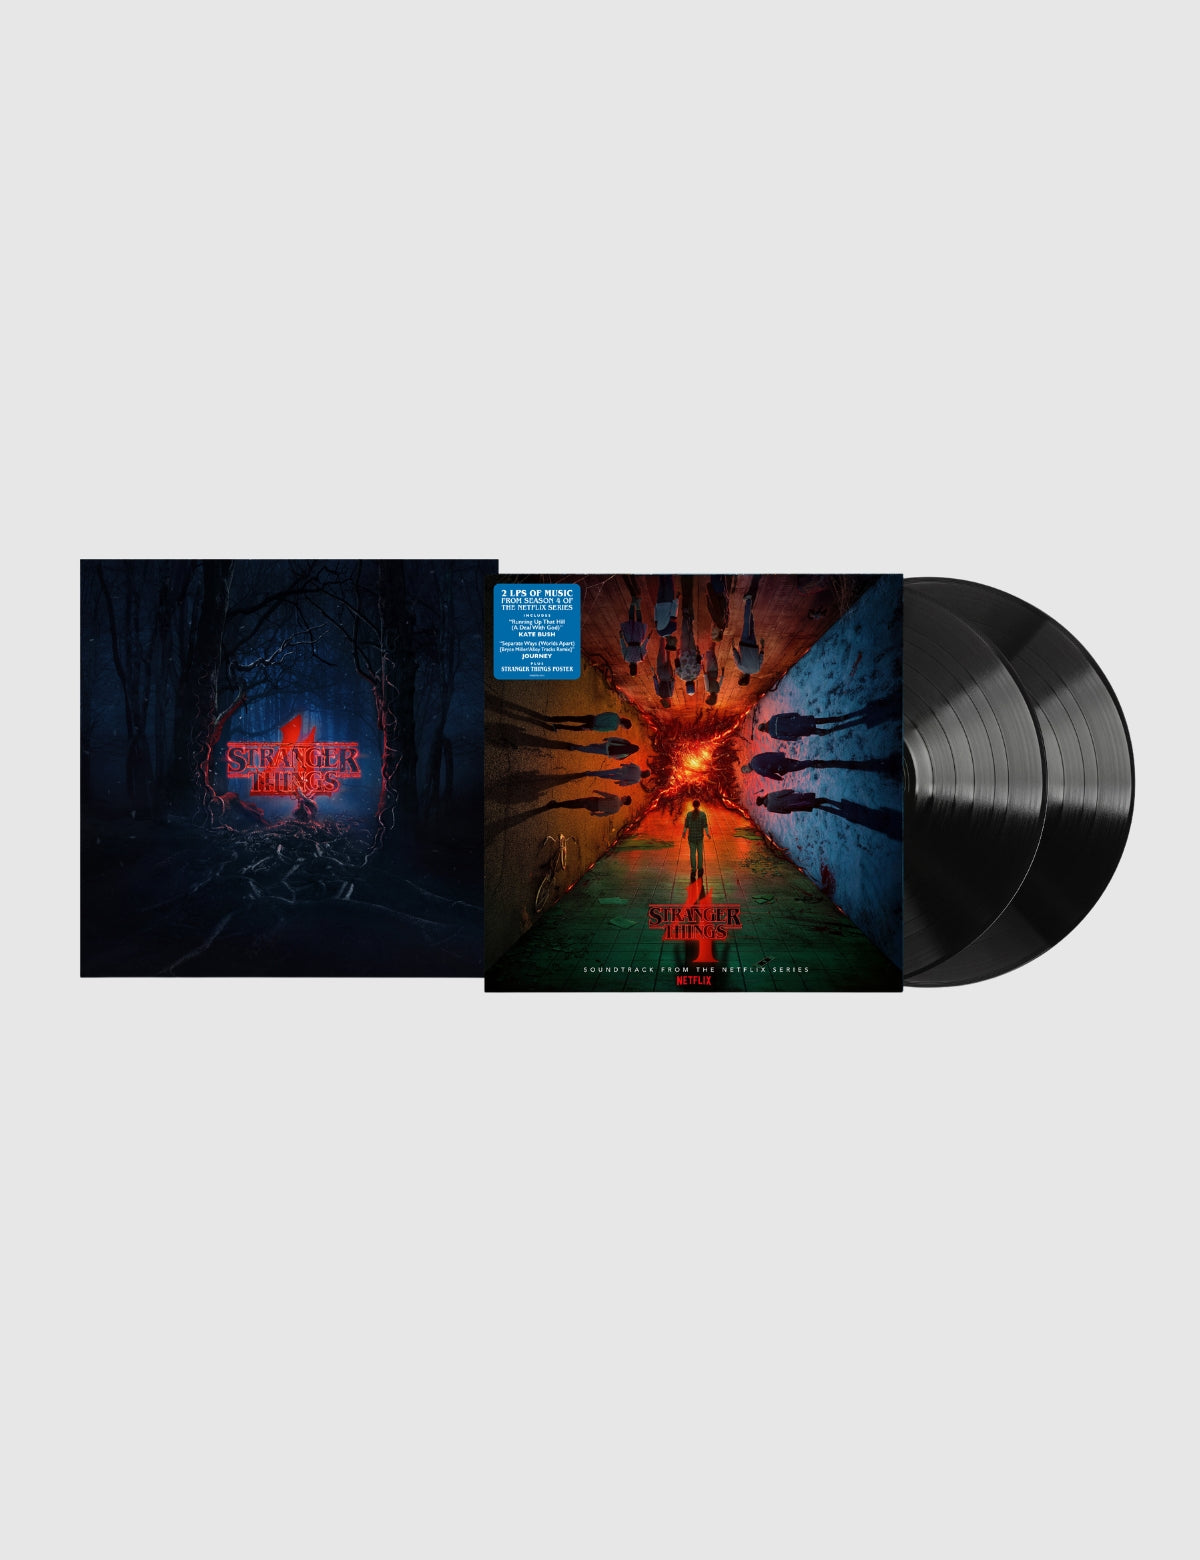 Buy Various : Stranger Things 4 (Soundtrack From The Netflix Series) (2xLP,  Album, Comp) Online for a great price – Tonevendor Records